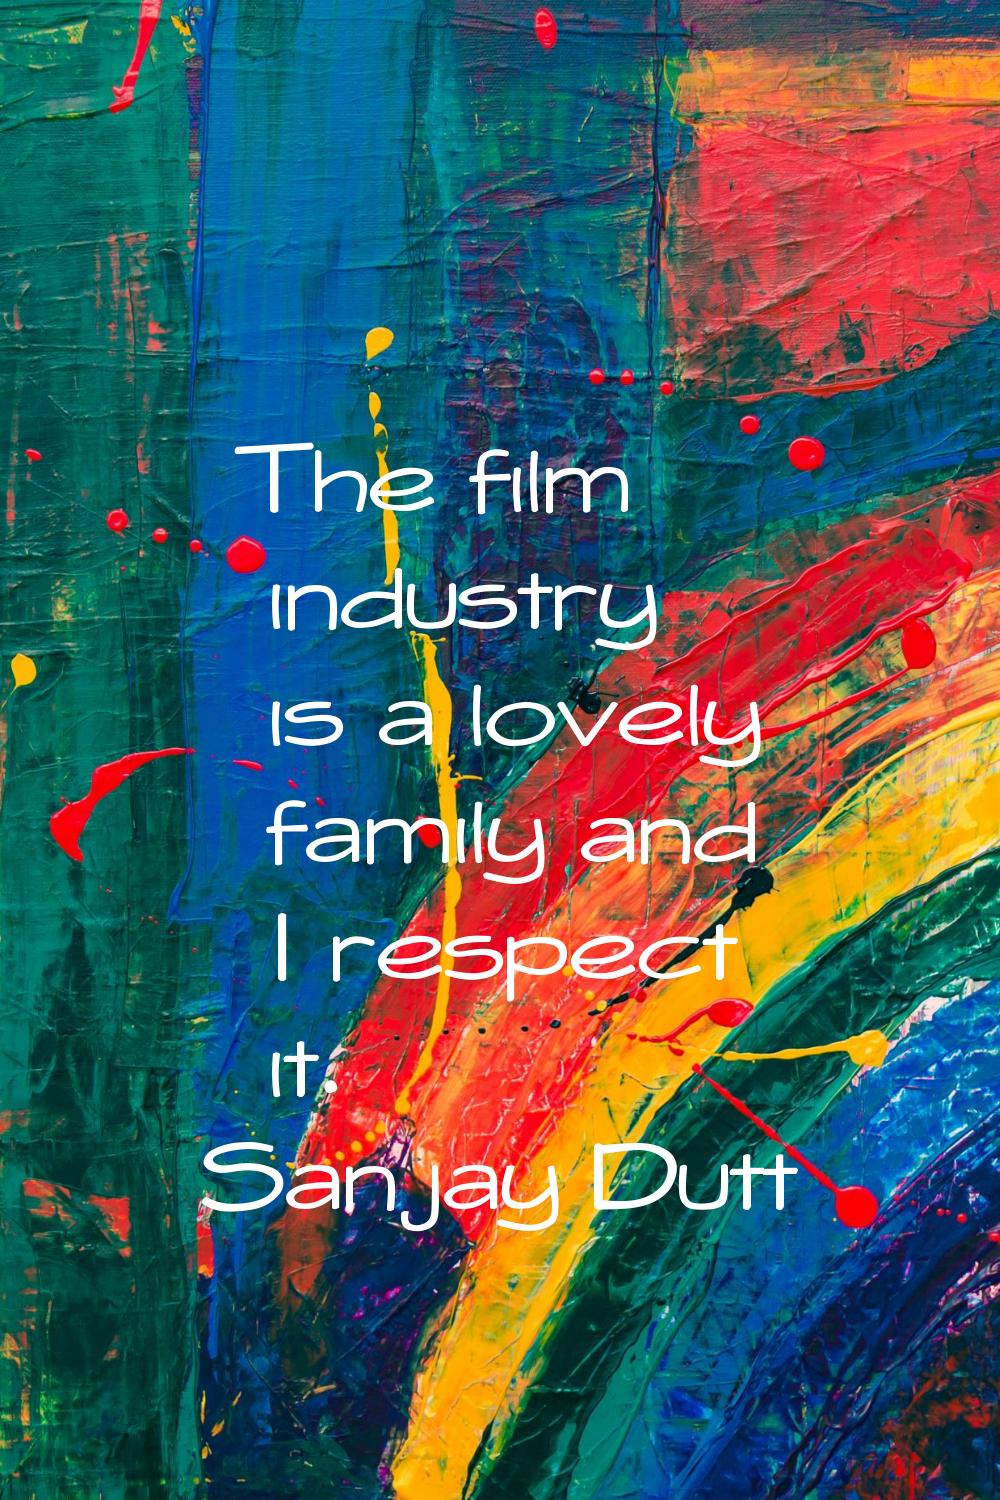 The film industry is a lovely family and I respect it.